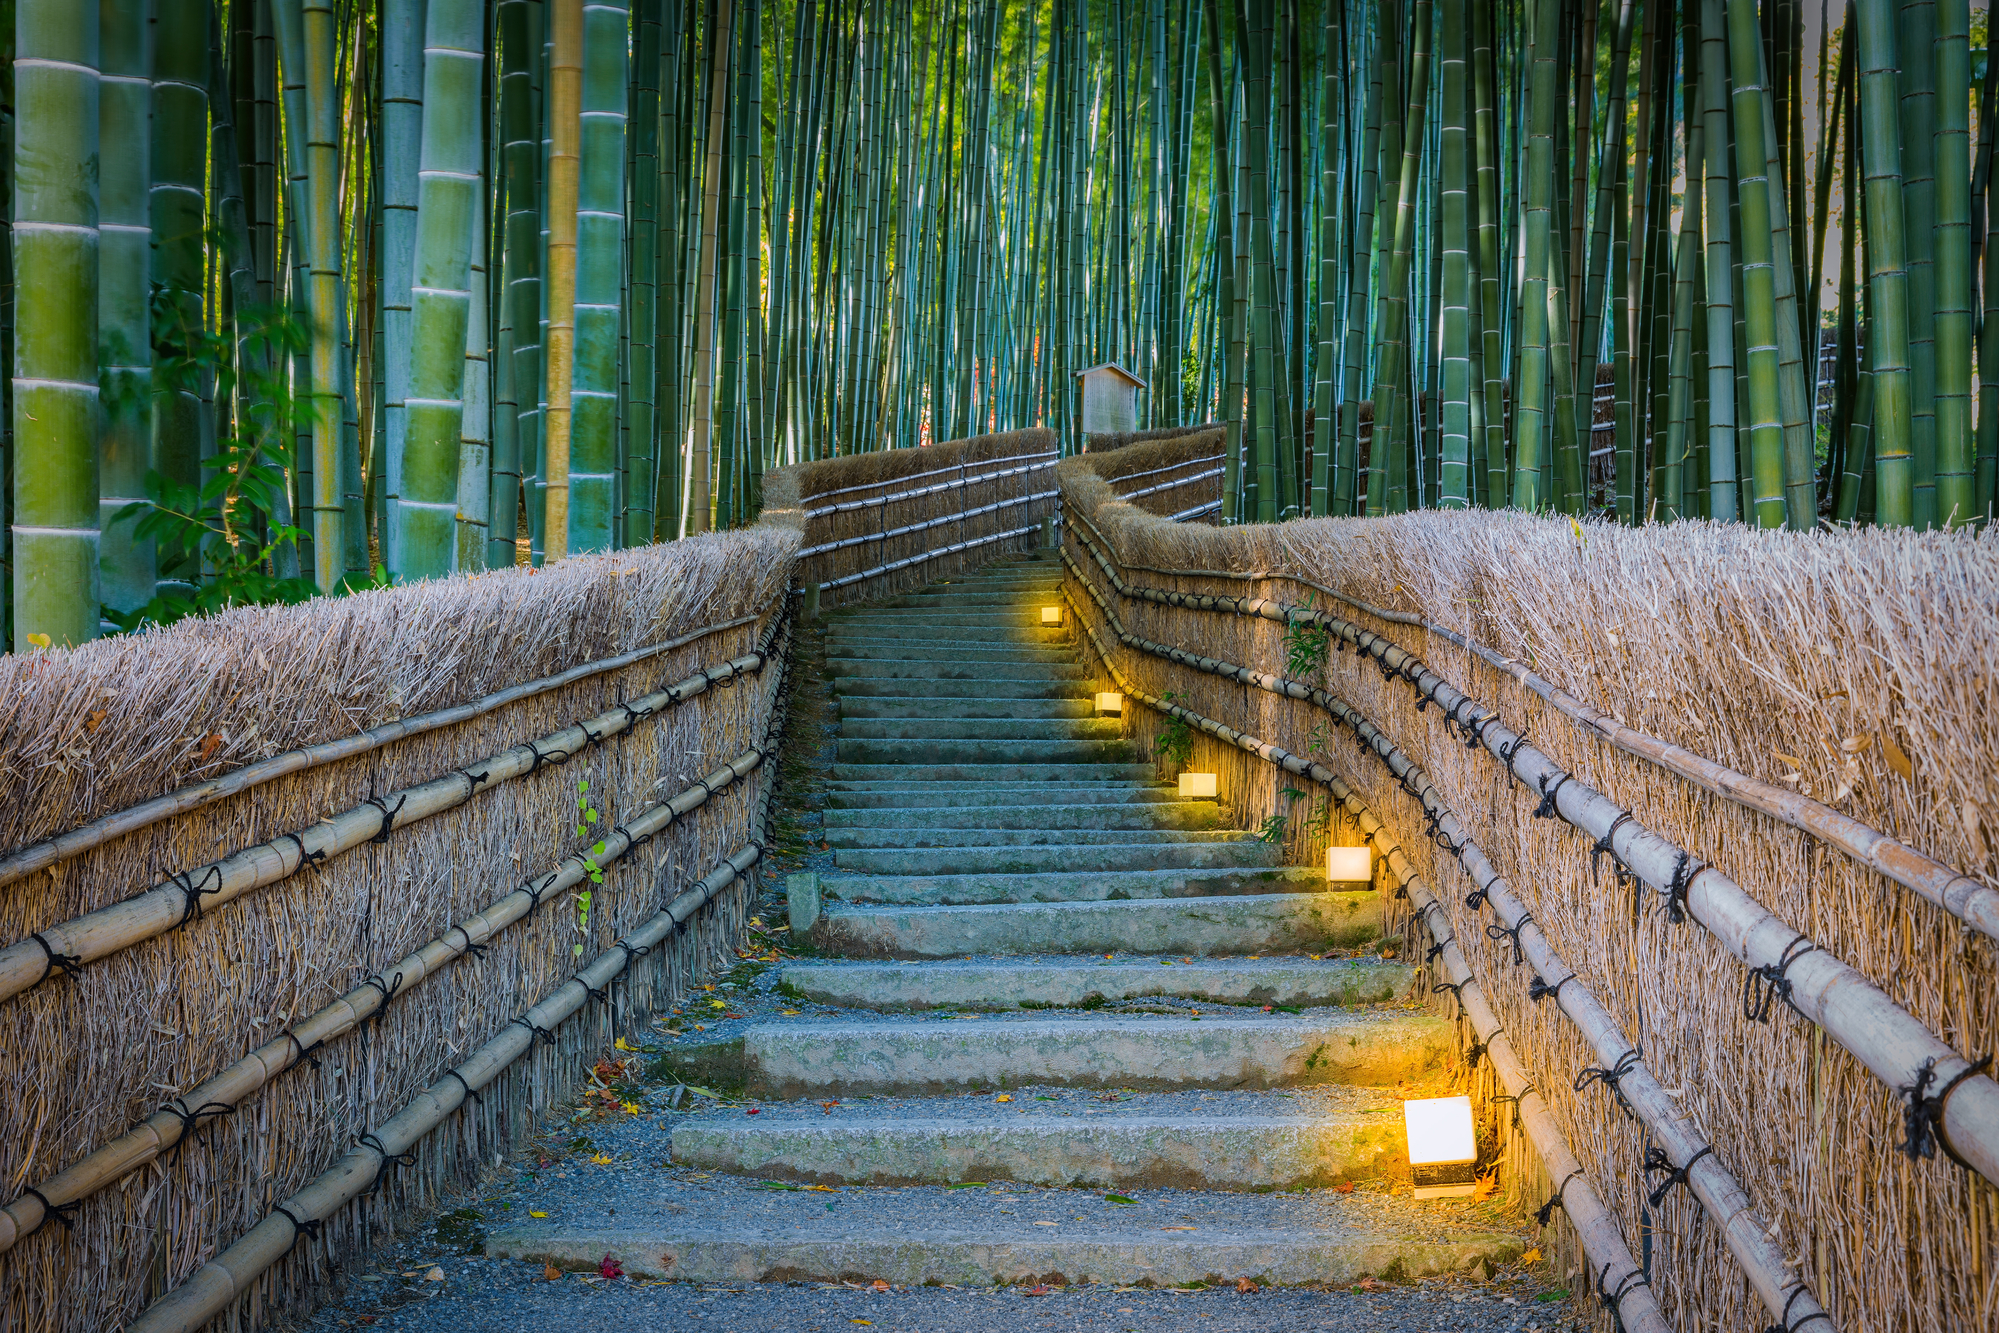 Cultural Significance of Bamboo in Japan